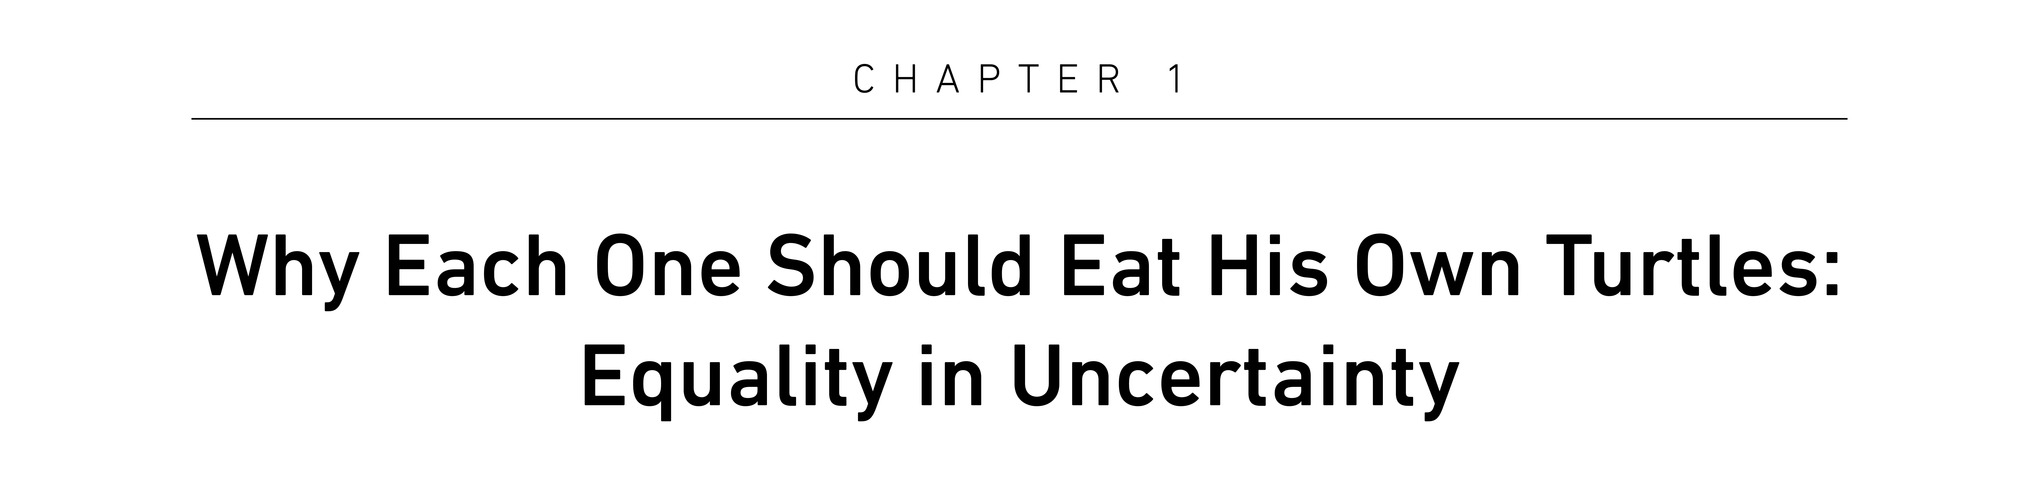 Chapter 1 Why Each One Should Eat His Own Turtles: Equality in Uncertainty